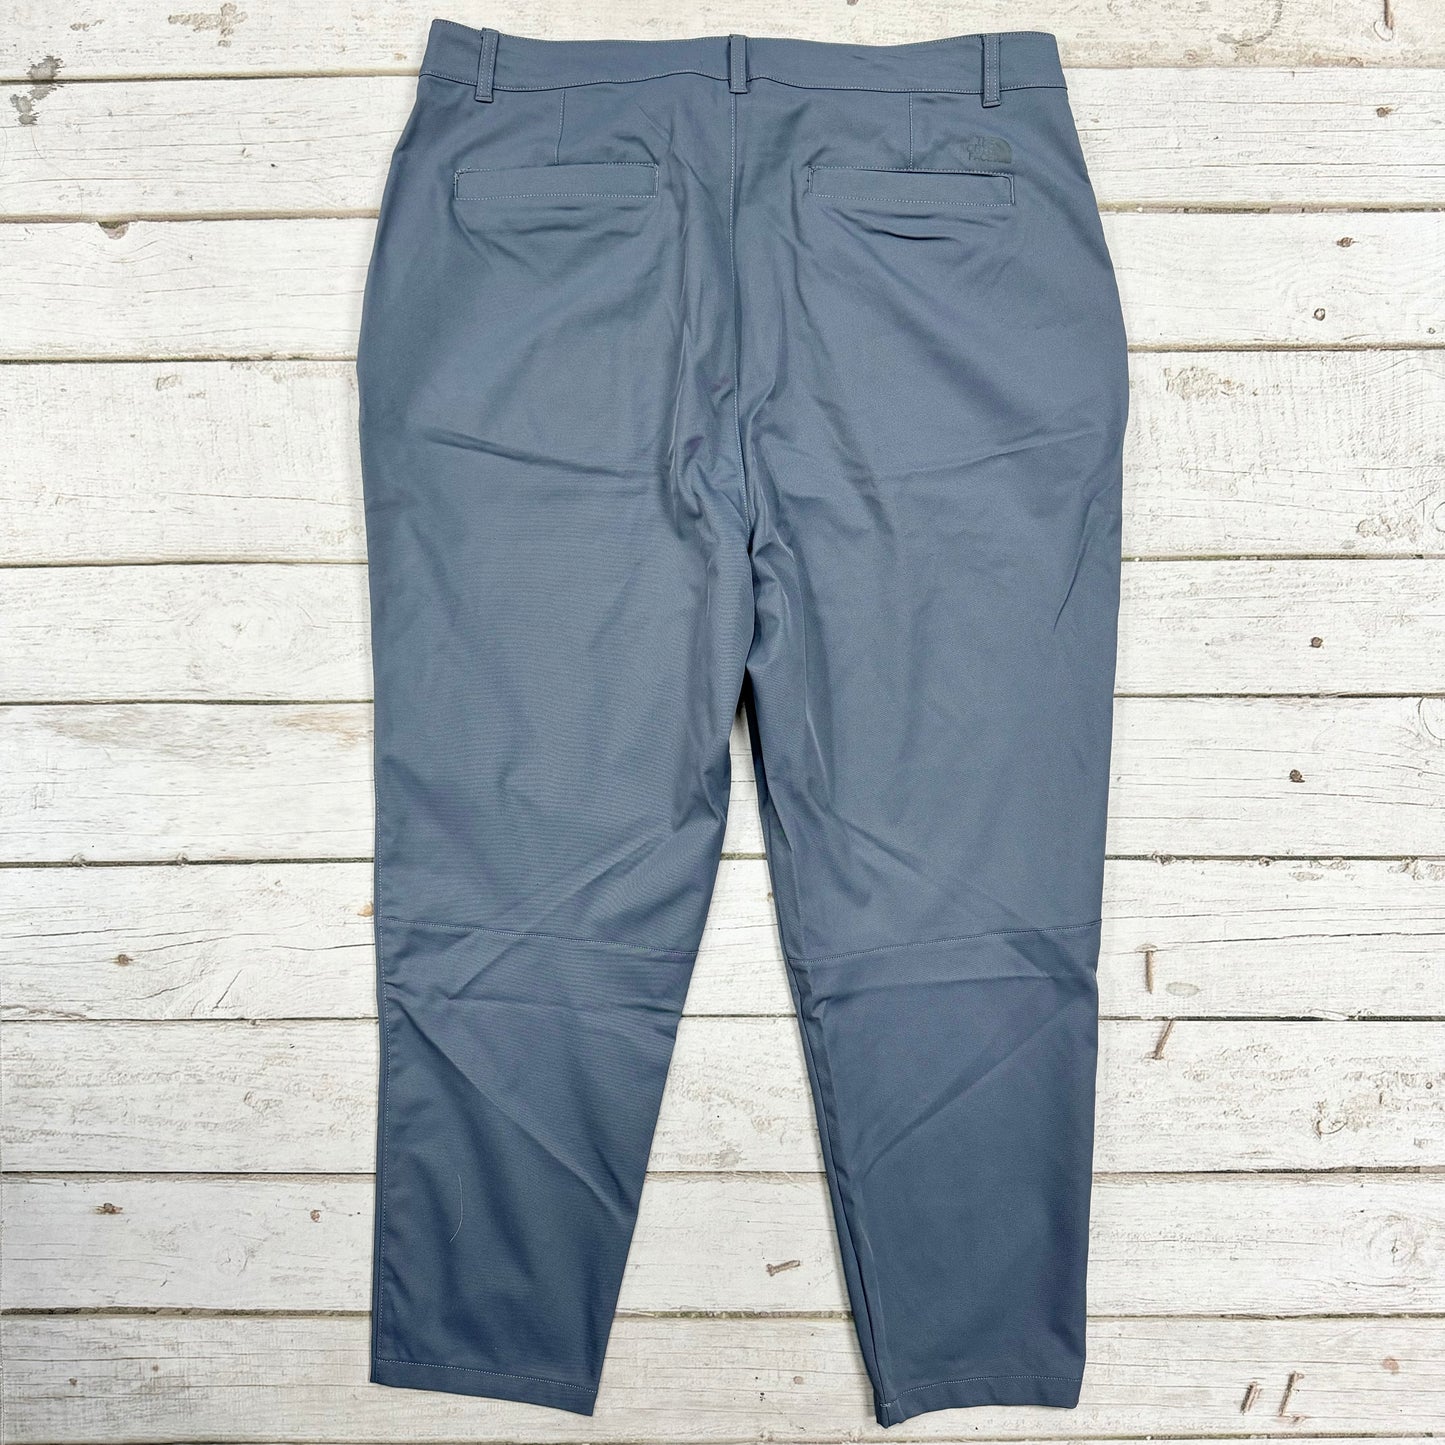 Pants Designer By North Face  Size: 20w